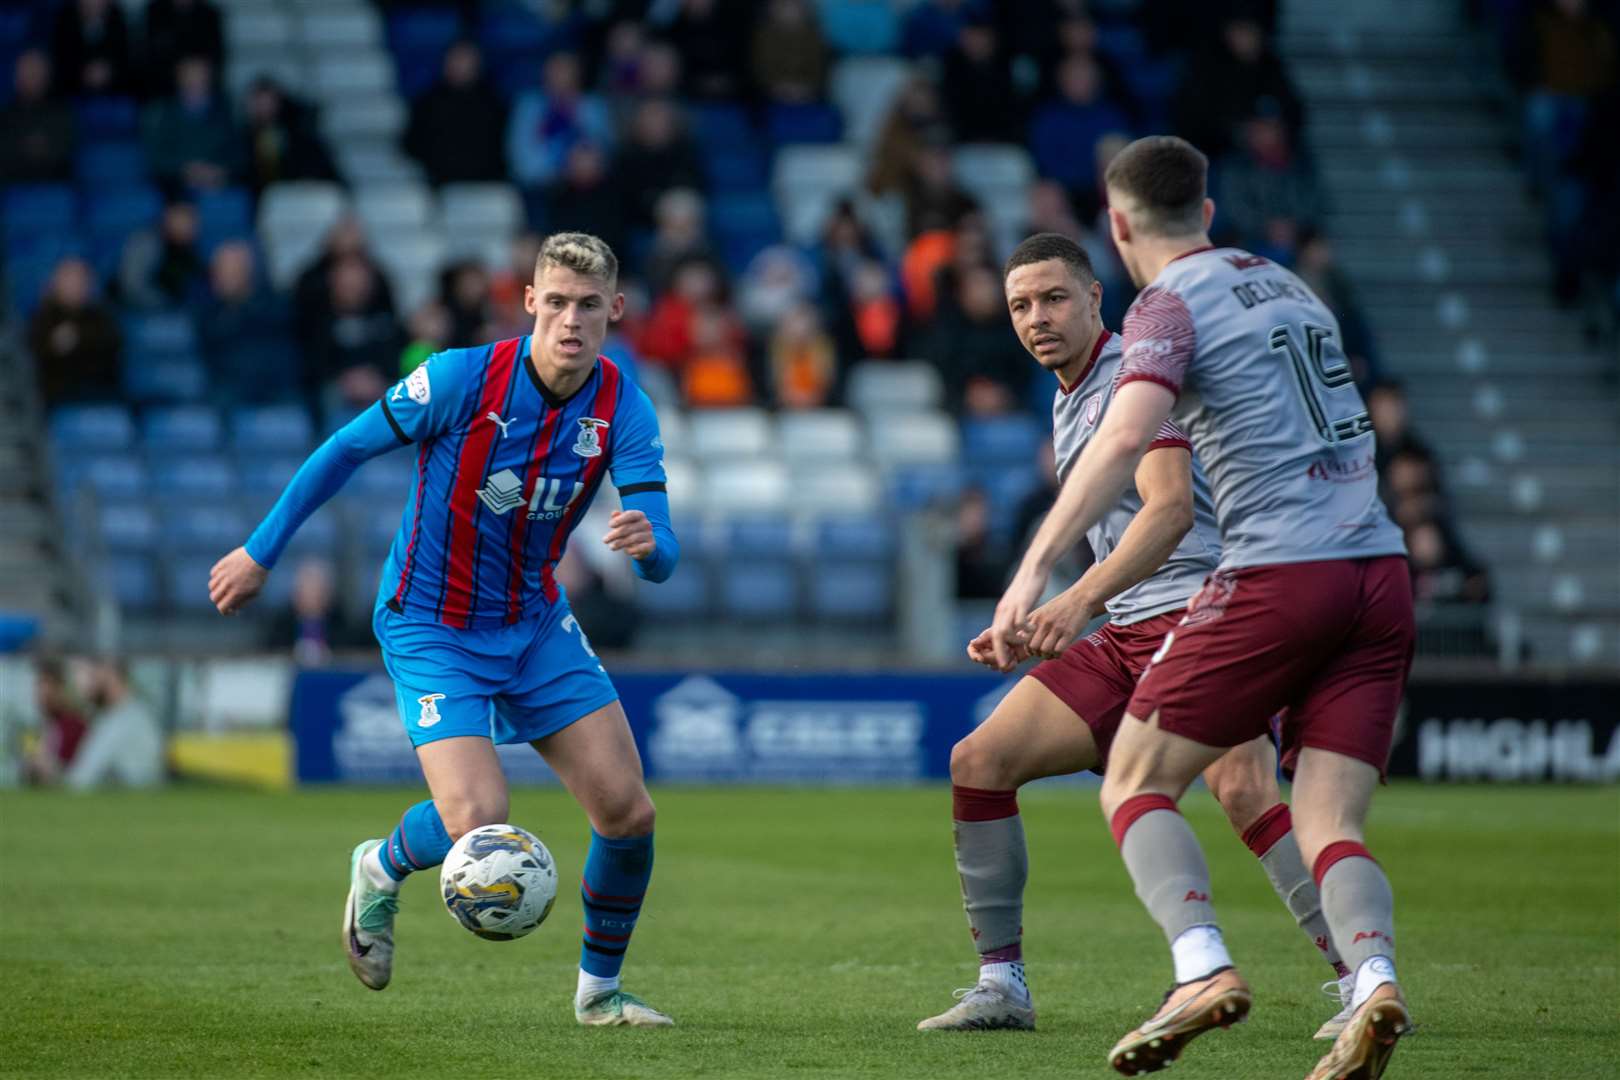 Caley Thistle's Wallace Duffy in action during the vital win over Arbroath a couple of weeks ago. Picture: Callum Mackay